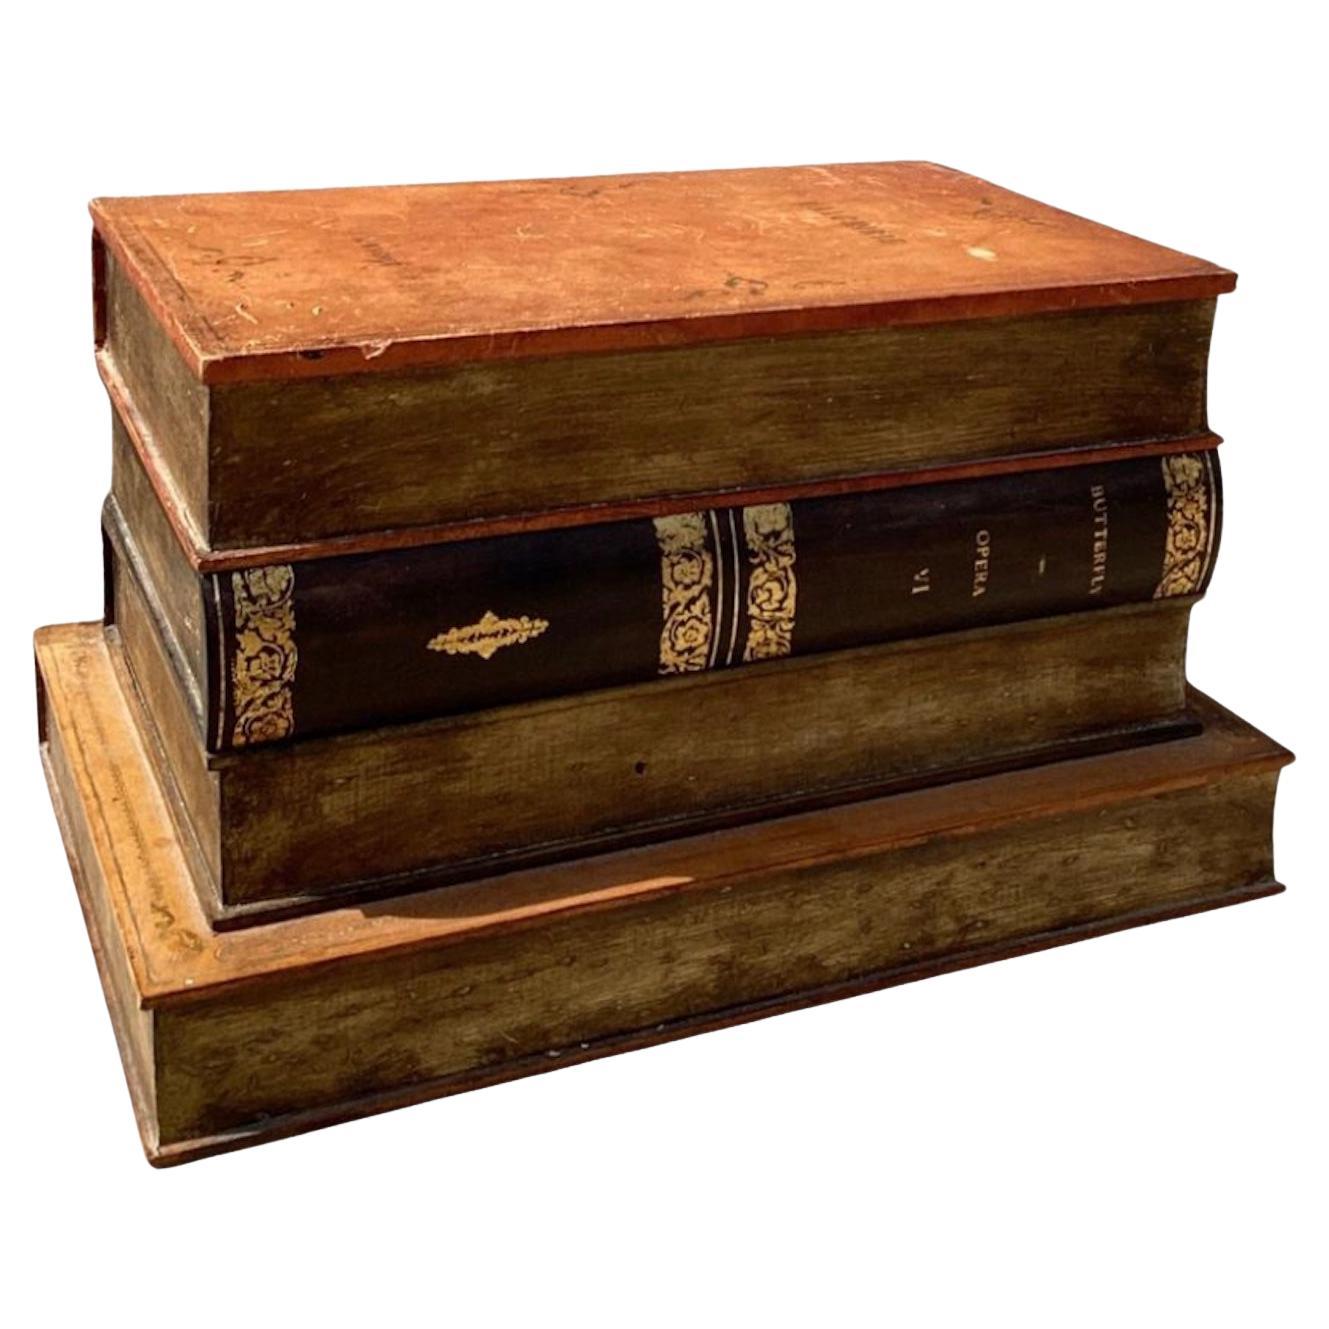 Handsome English Leather Bound Books As A Side Table With Interior Storage. For Sale